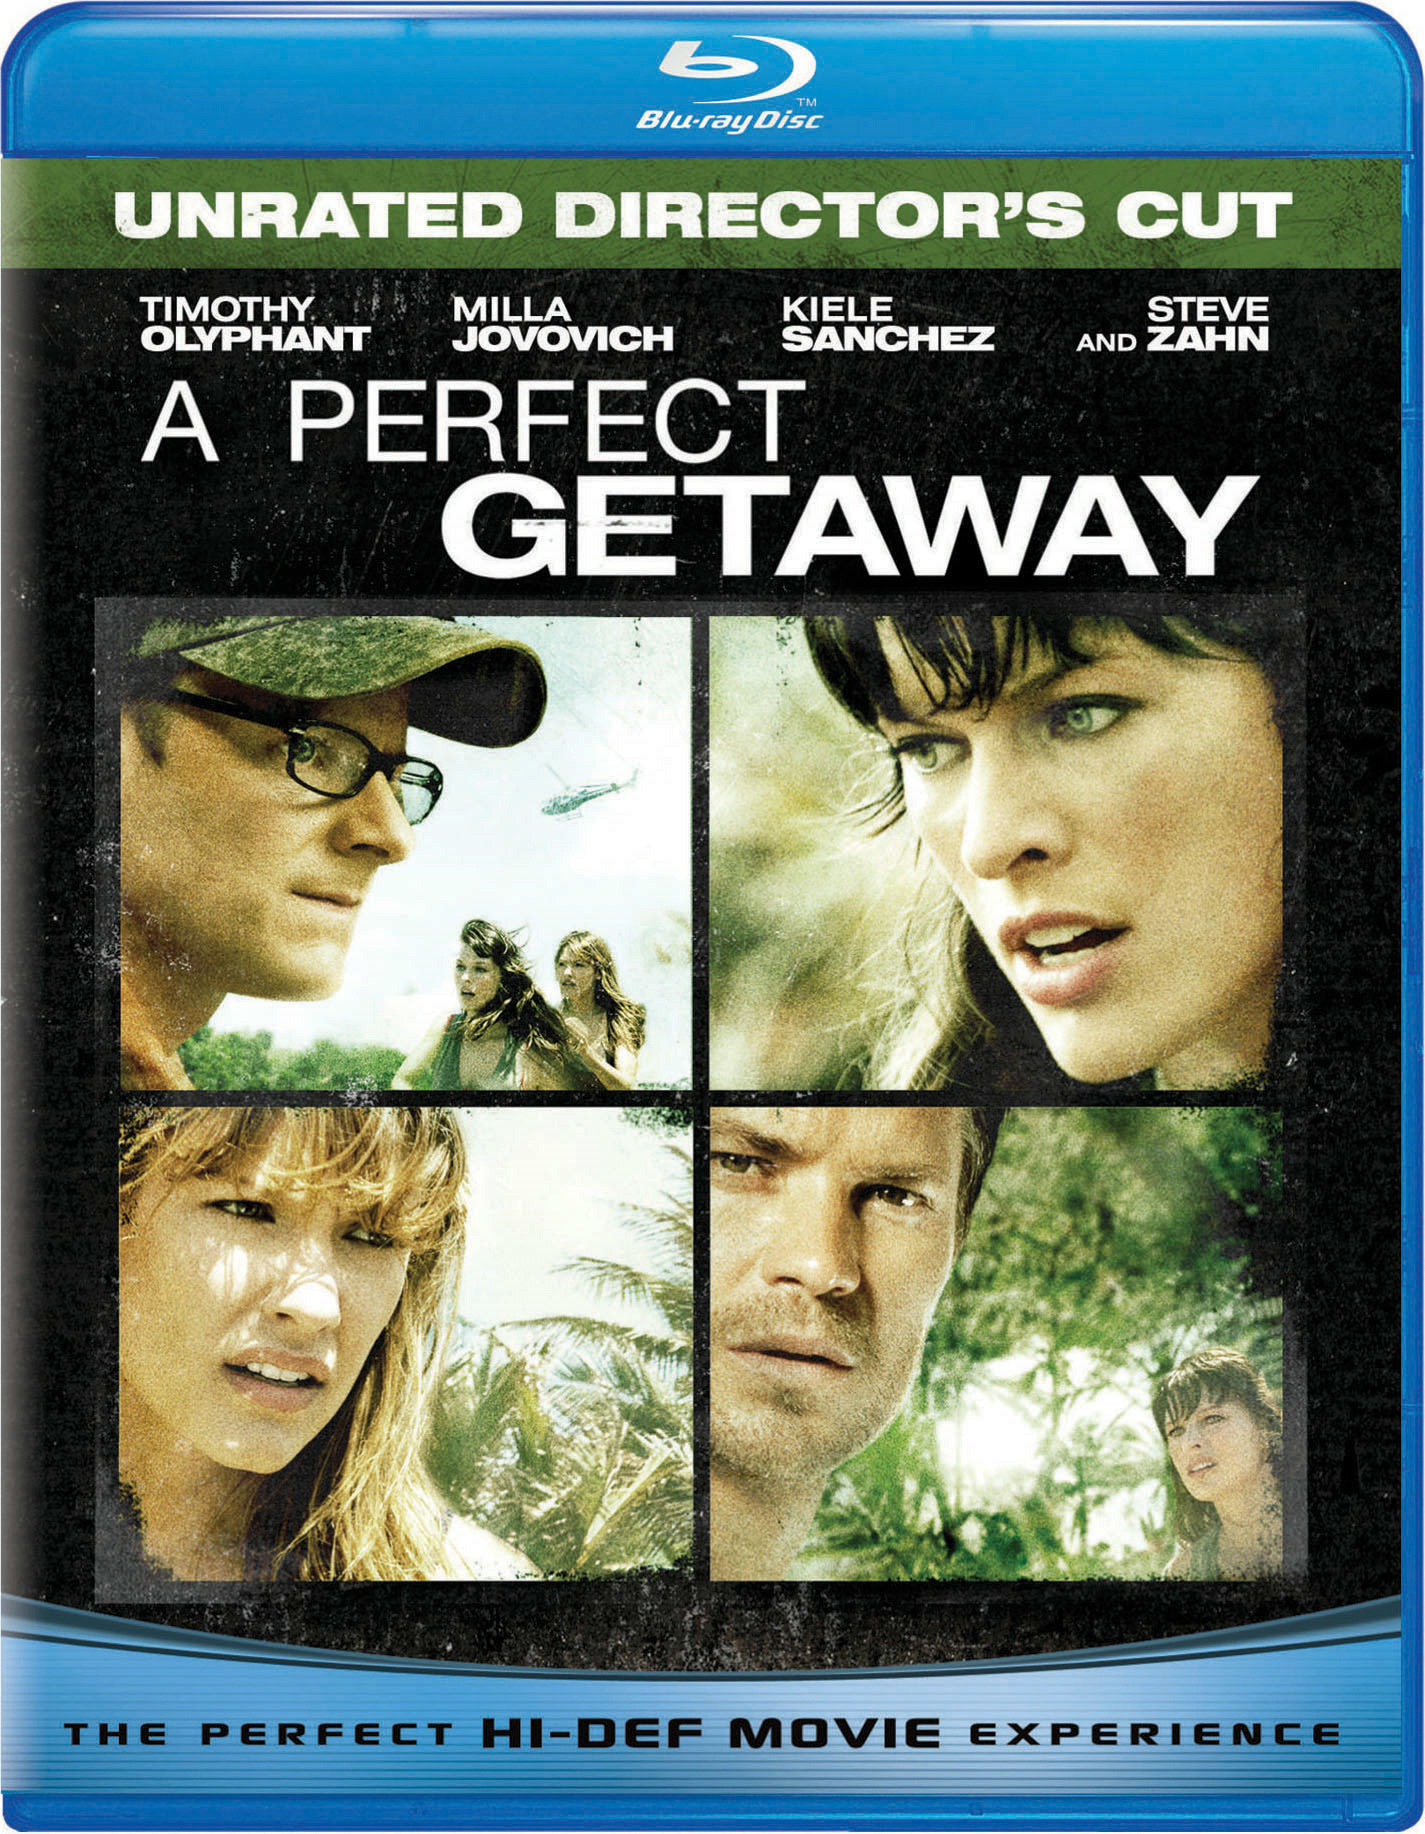 A Perfect Getaway (Blu-ray Unrated Director's Cut) - Blu-ray [ 2009 ]  - Thriller Movies On Blu-ray - Movies On GRUV